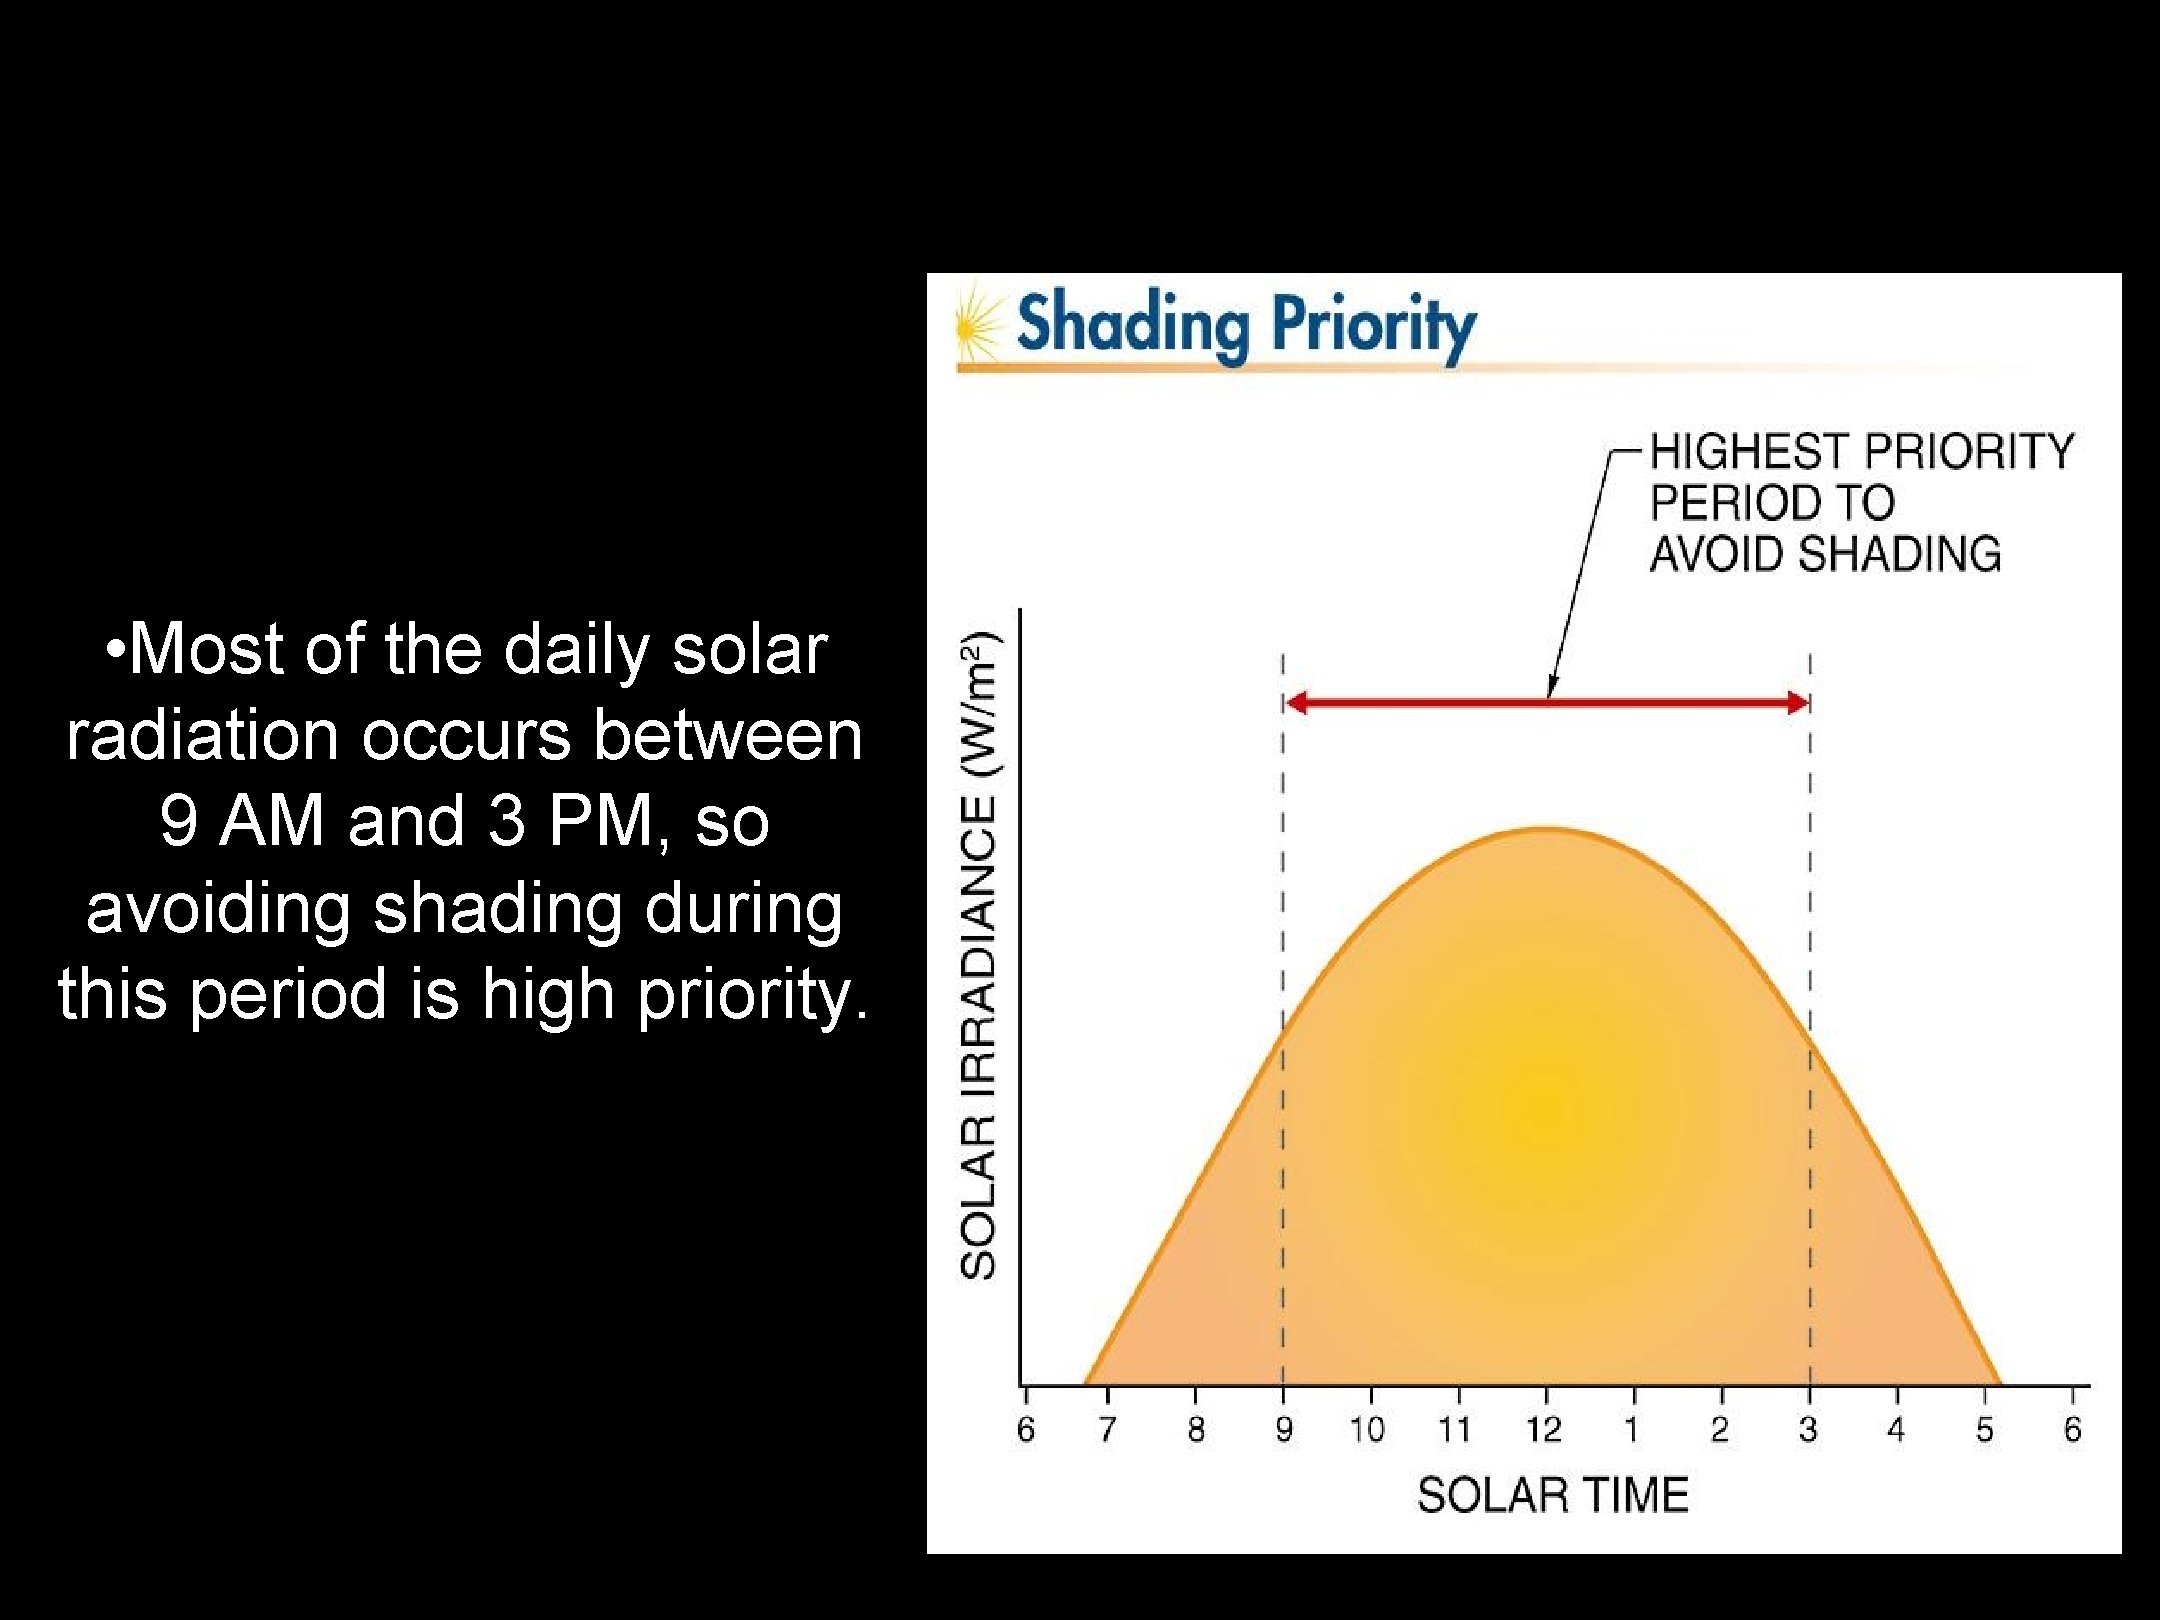  • Most of the daily solar radiation occurs between 9 AM and 3